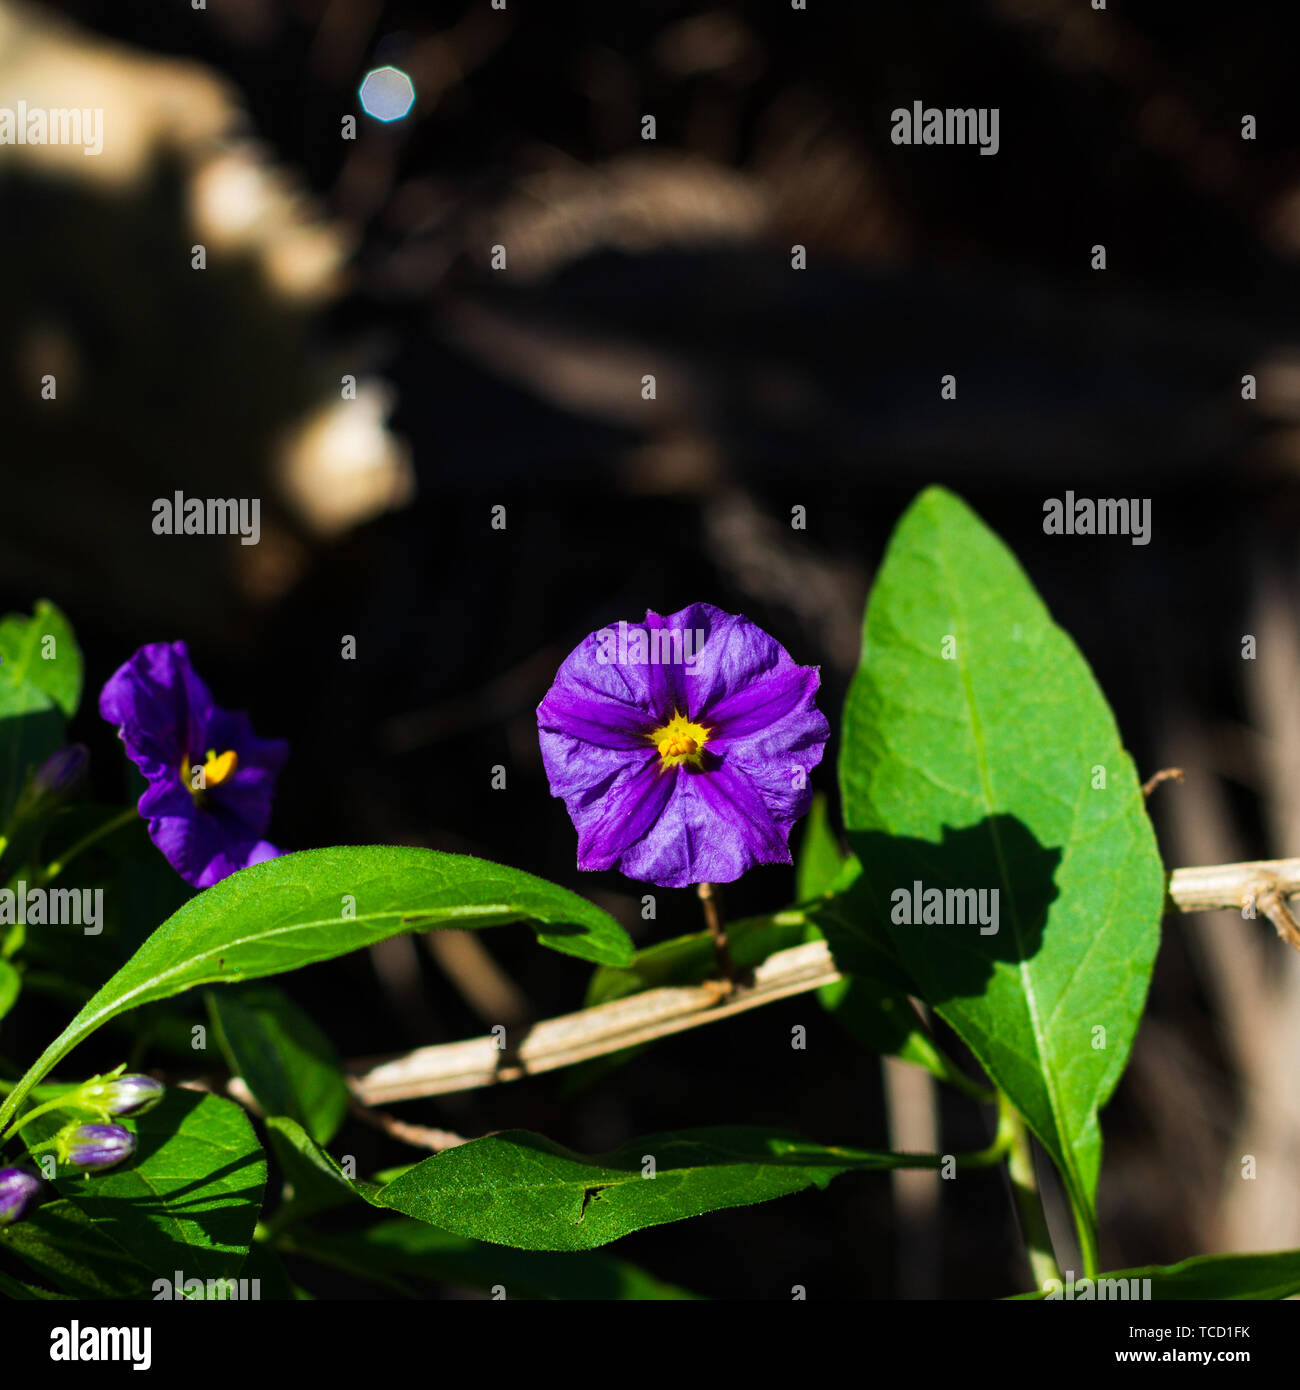 A purple flower with a yellow center shaped like a five point star Stock Photo